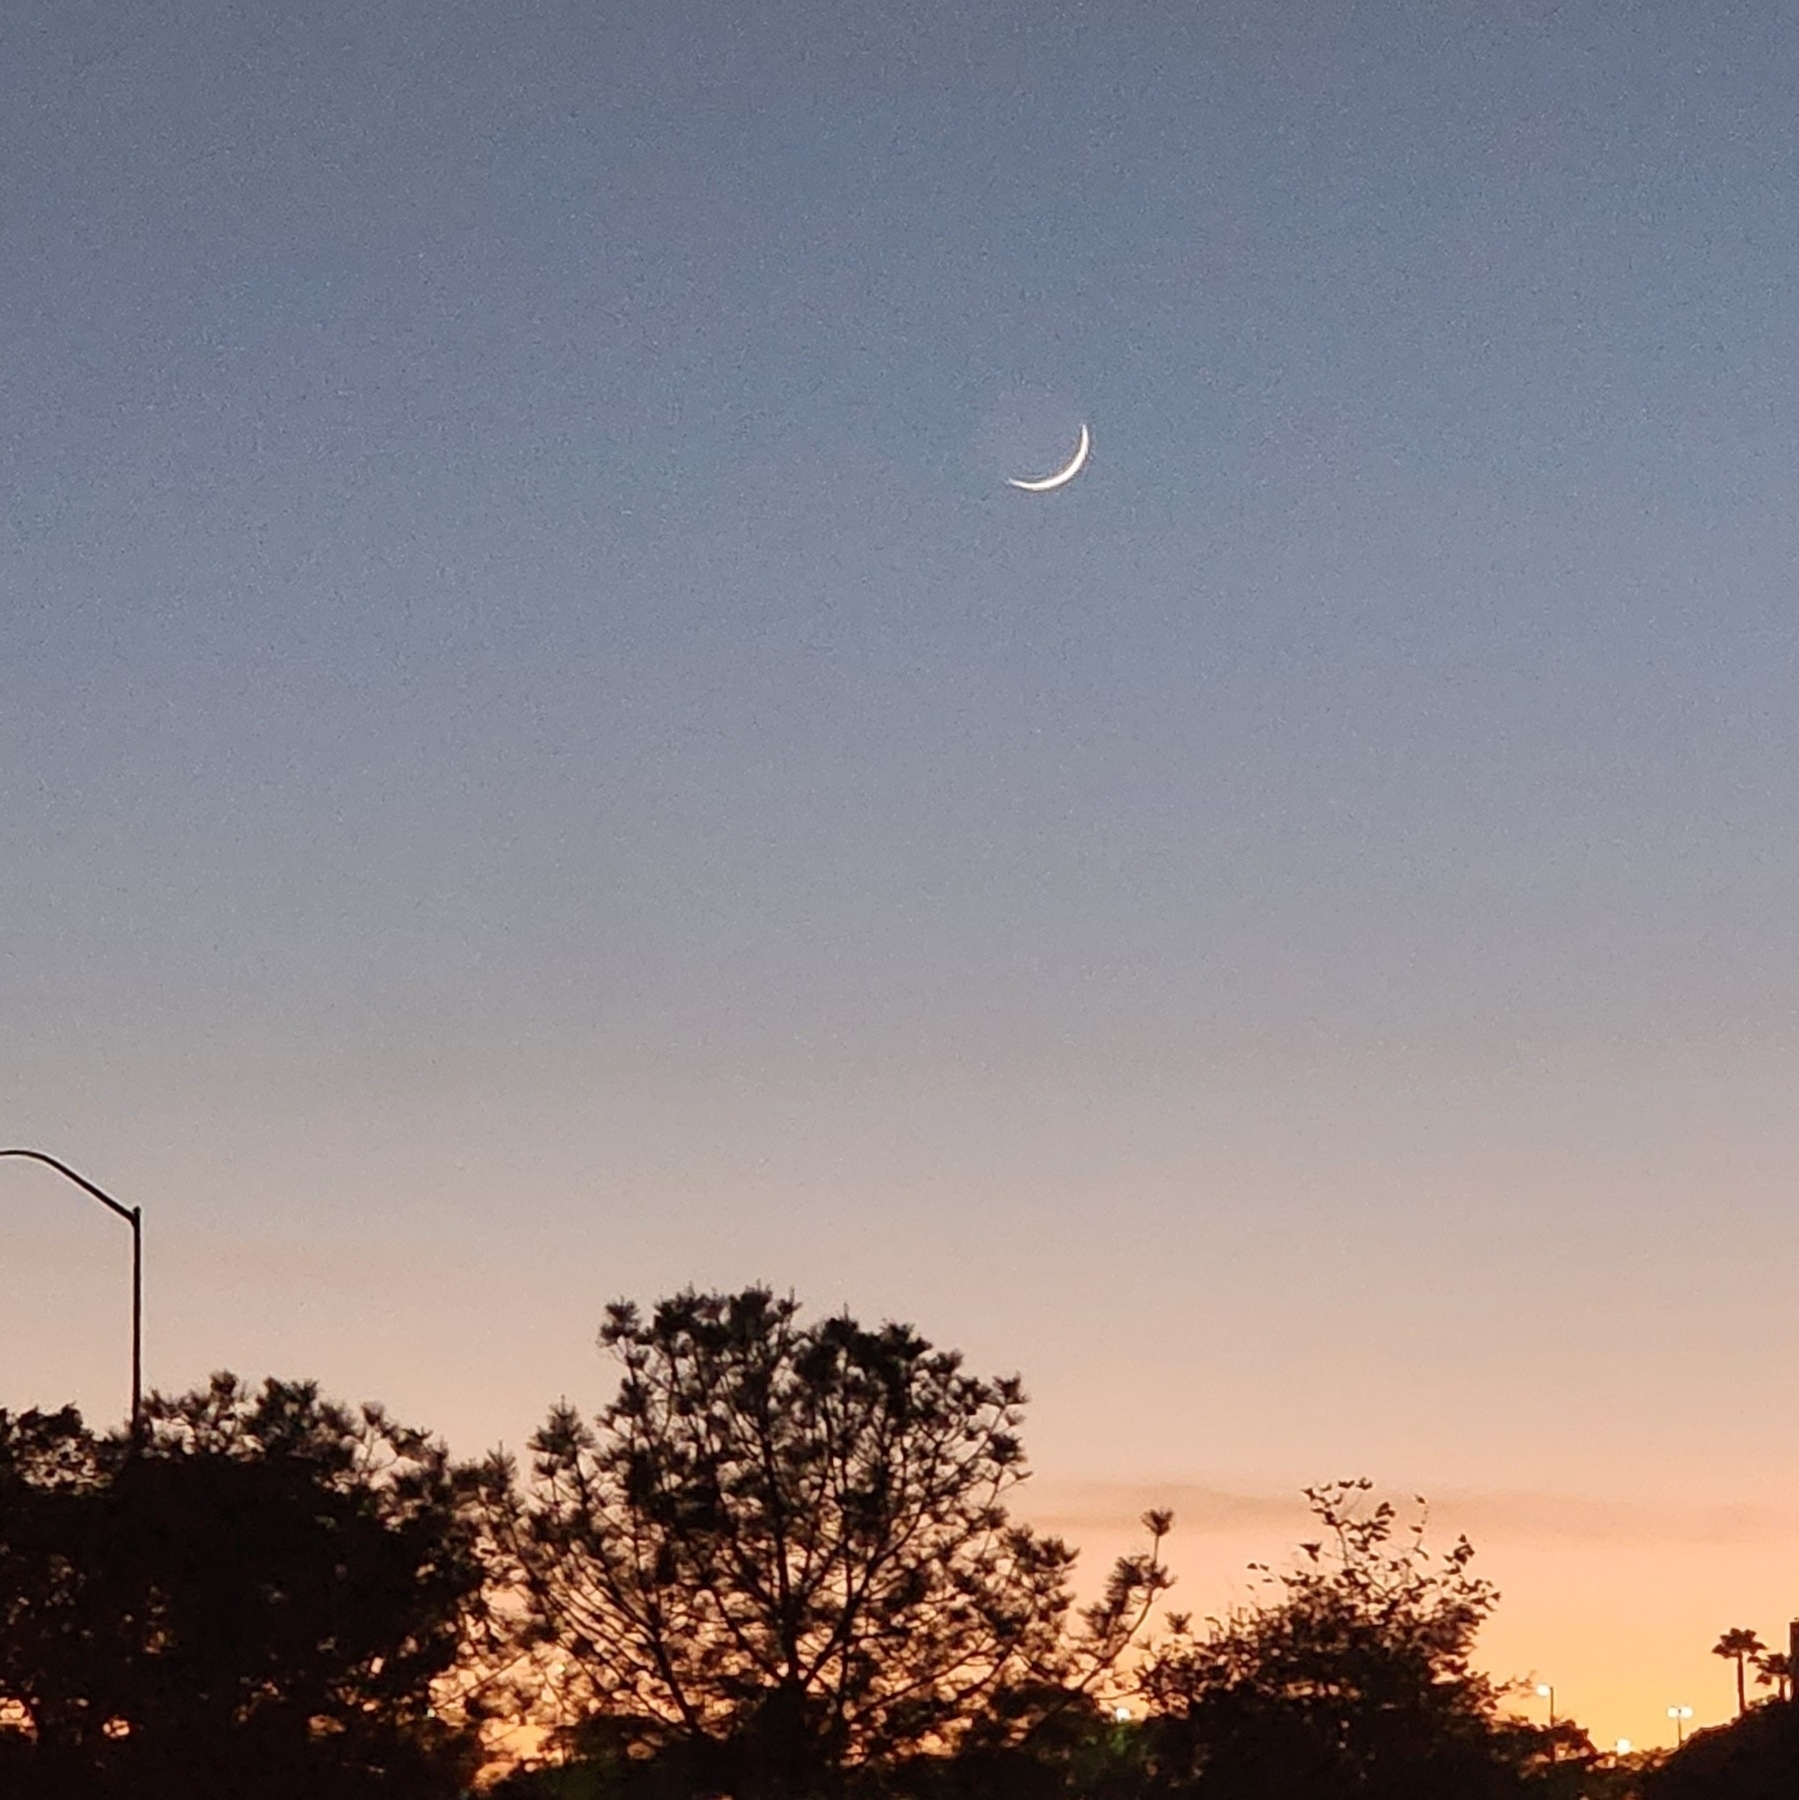 Crescent moon from the freeway, at dusk